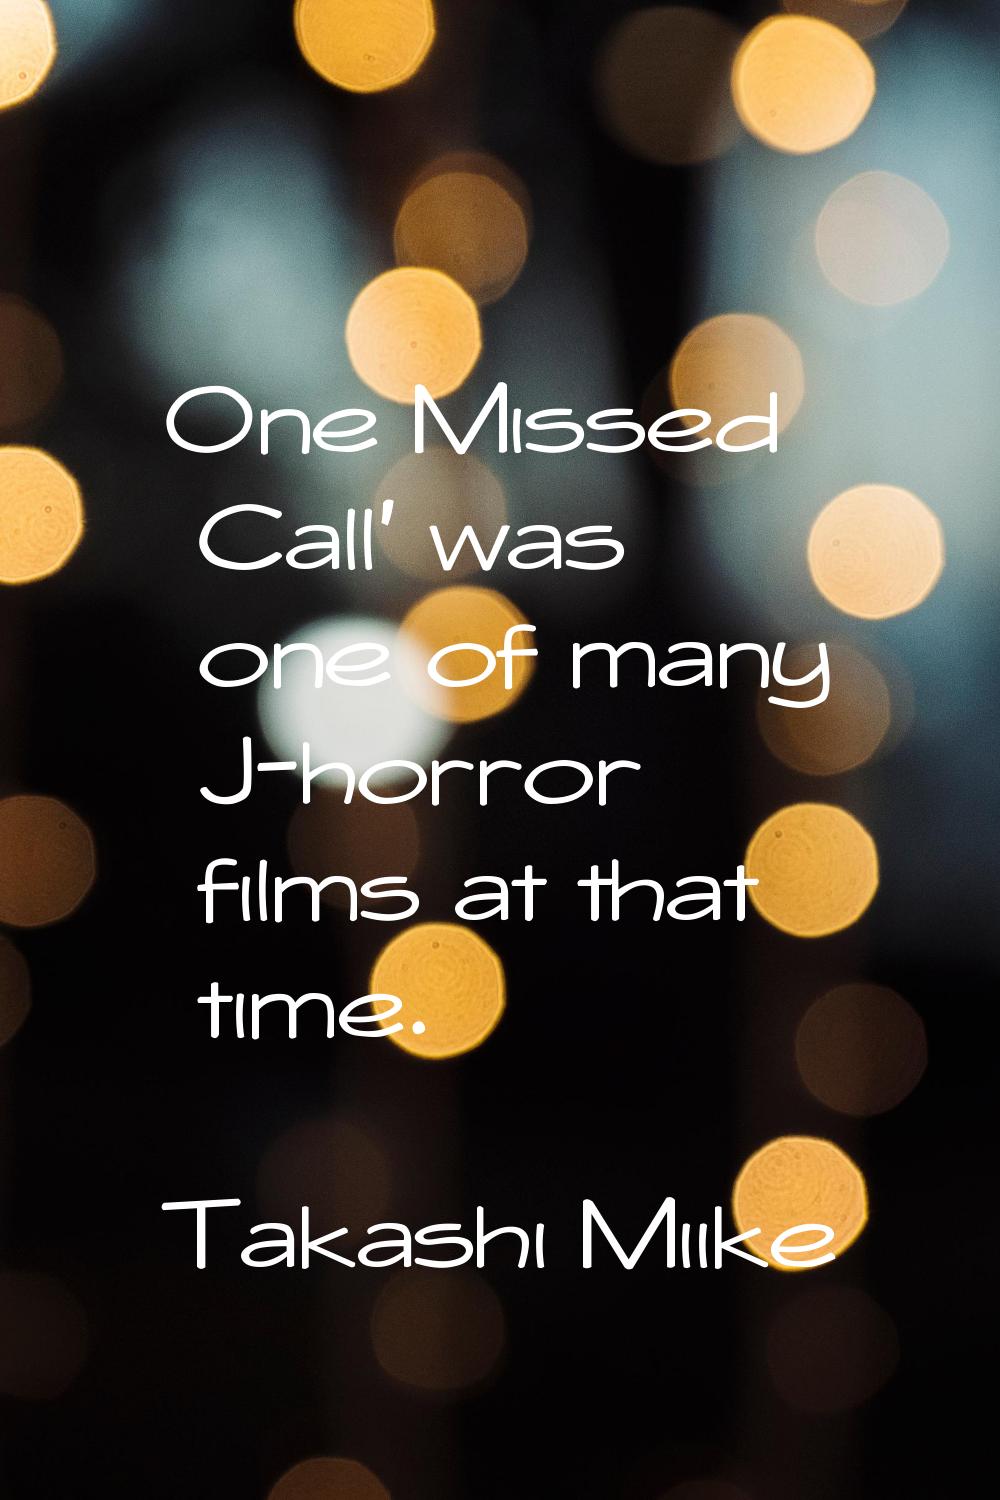 One Missed Call' was one of many J-horror films at that time.